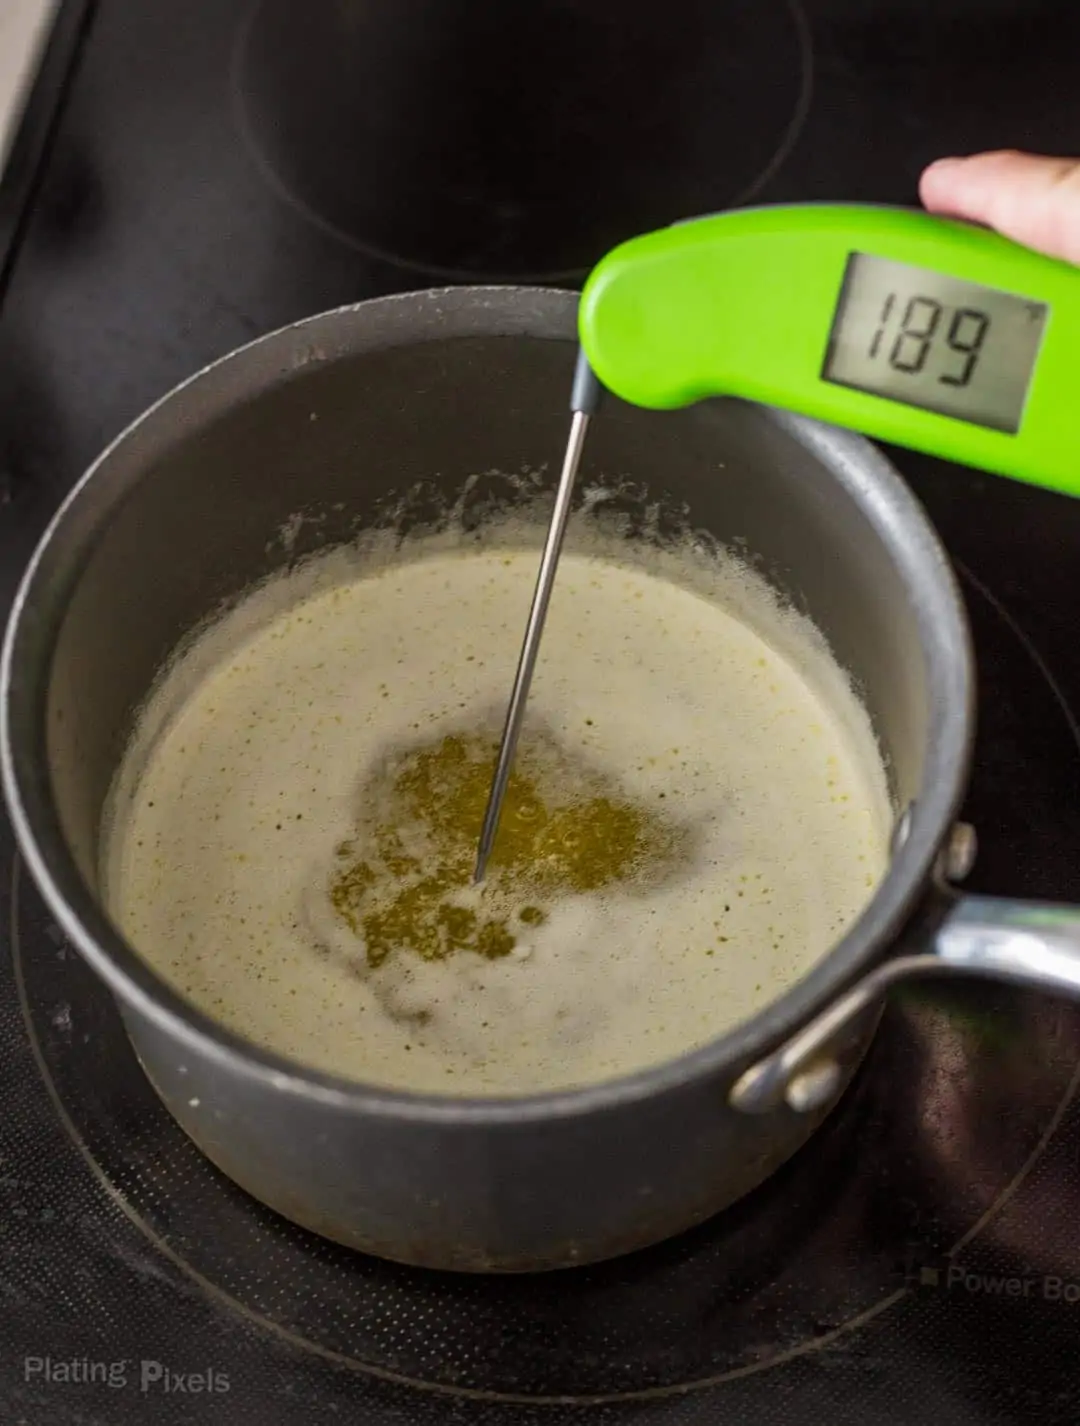 Using an instant-read thermometer to check temperature of melted butter